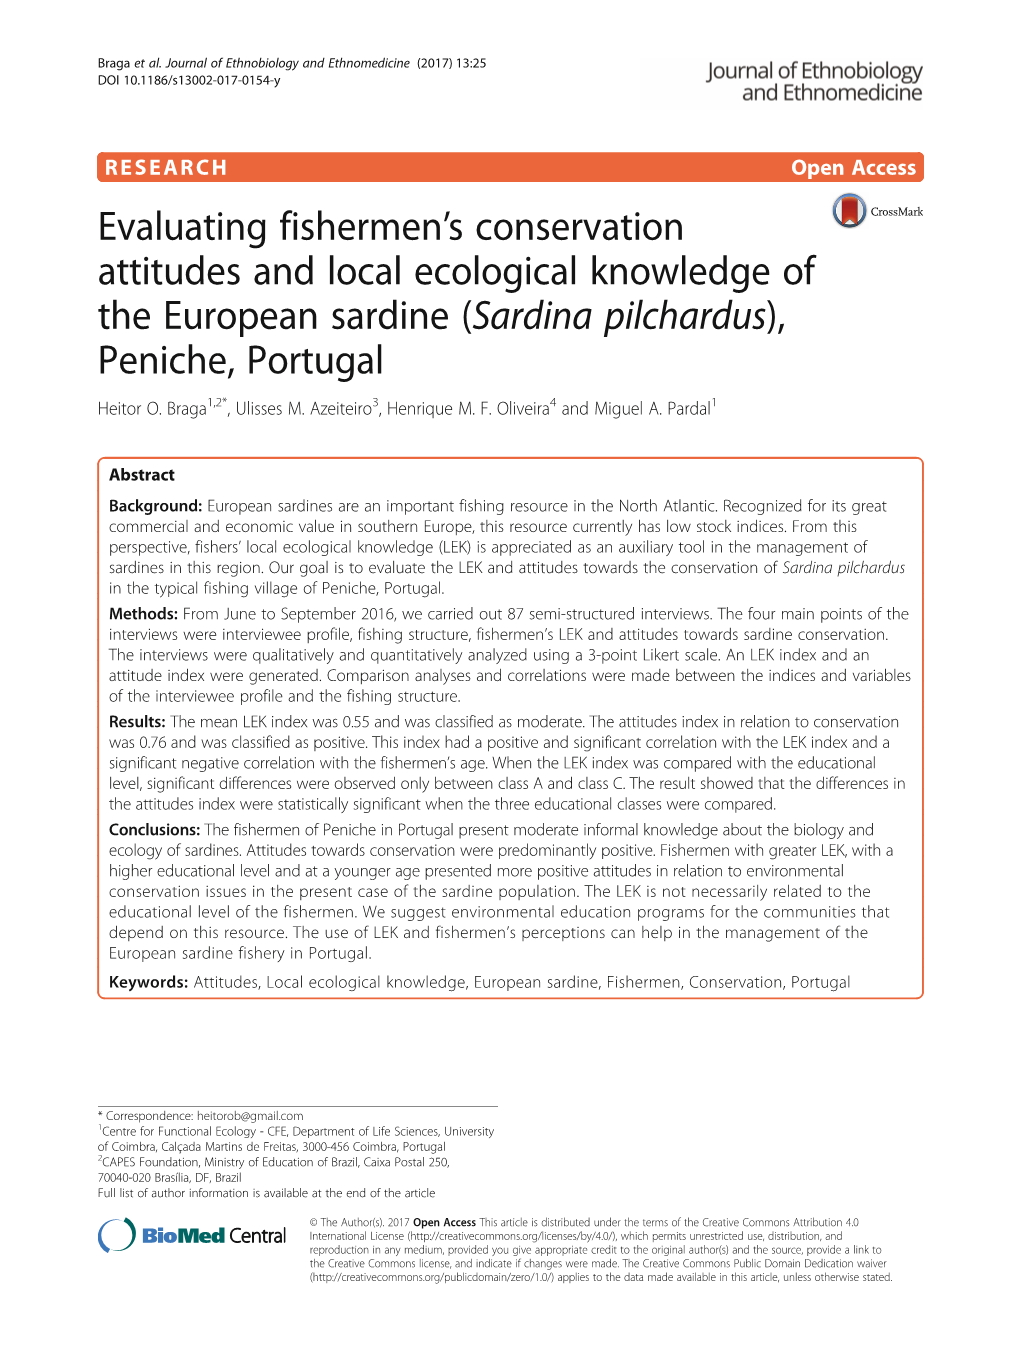 Evaluating Fishermen's Conservation Attitudes and Local Ecological